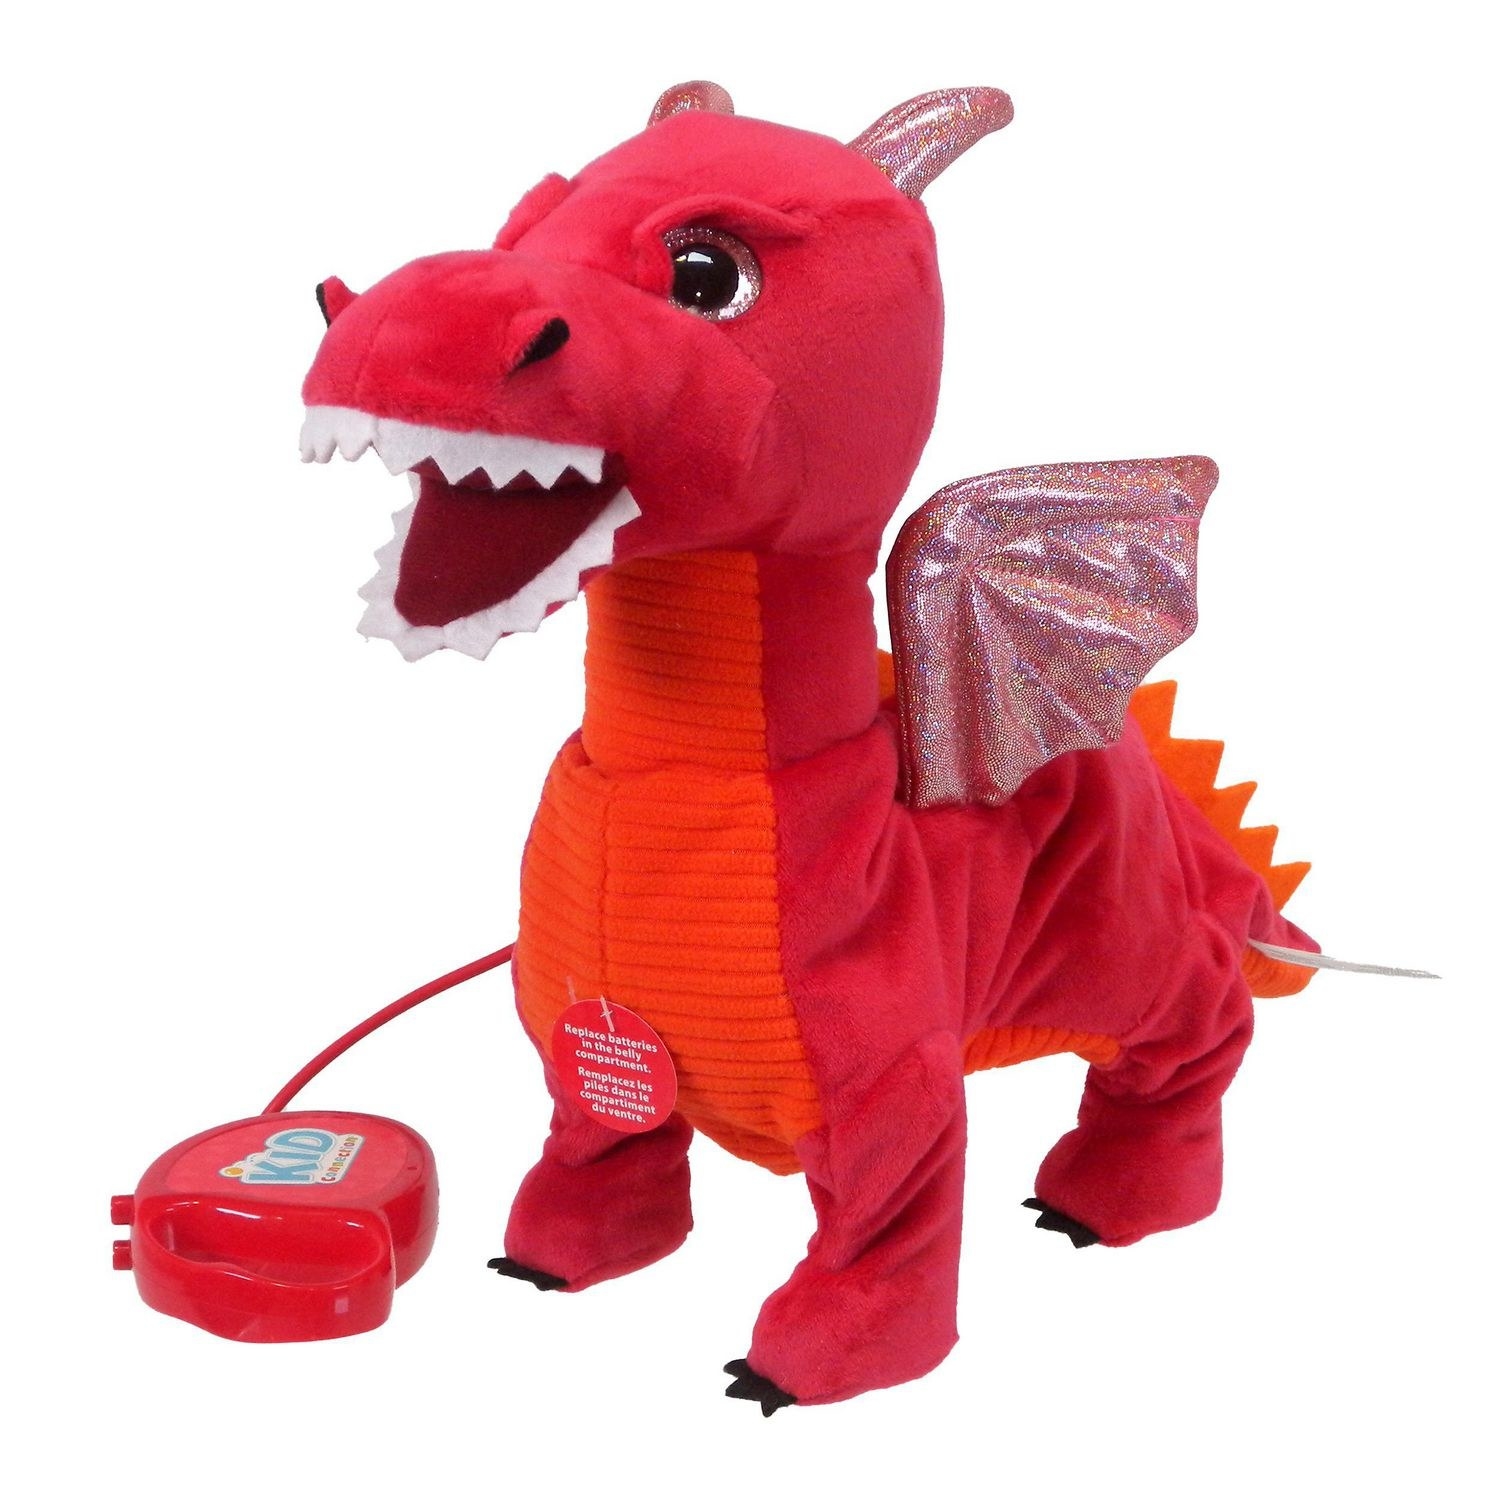 the dragon toy